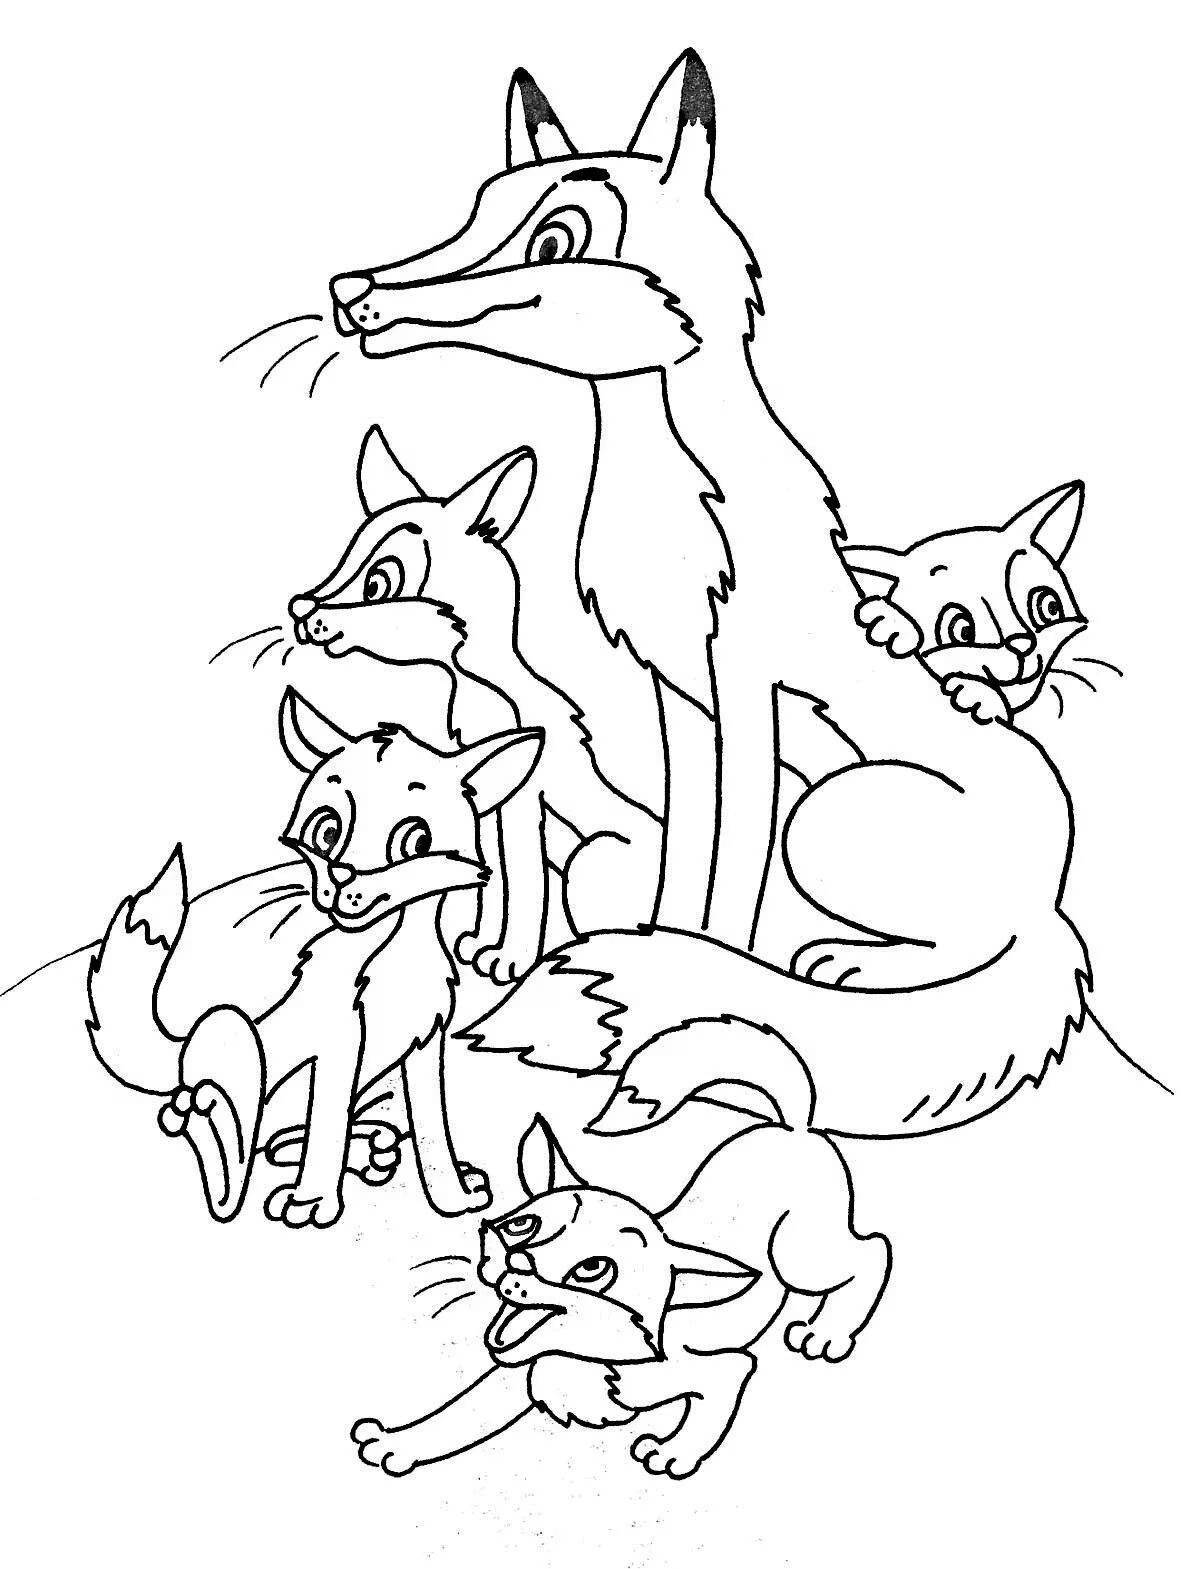 Coloring page beckoning cunning fox